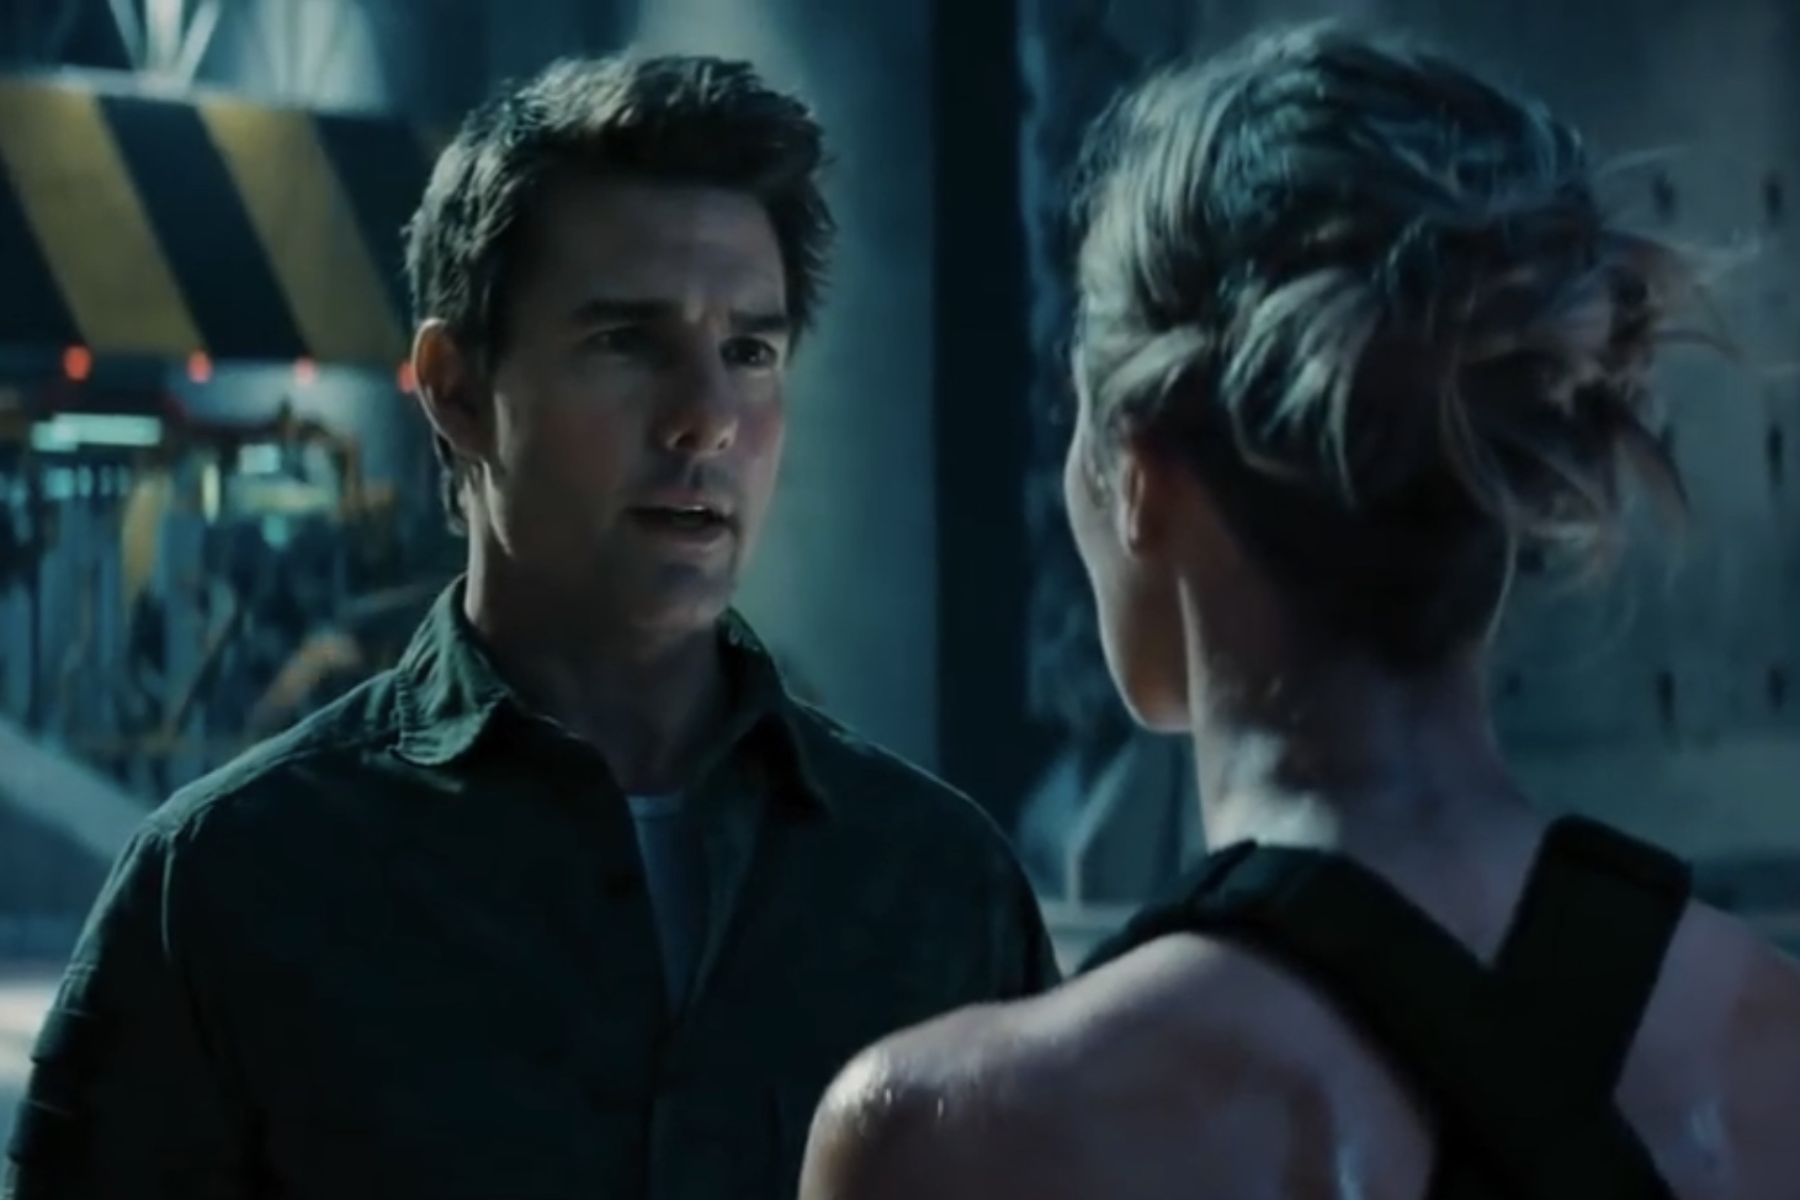 <p>In perfect Tom Cruise form, <em>Edge of Tomorrow </em>is a film where he is in a perpetual combat loop, trying to break the pattern and save the day. Fans were upset that everything that could go wrong does, but everything is magically solved in the end, and everything is okay. Viewers claim that this forced a happy ending to the film when it should have ended tragically.</p>